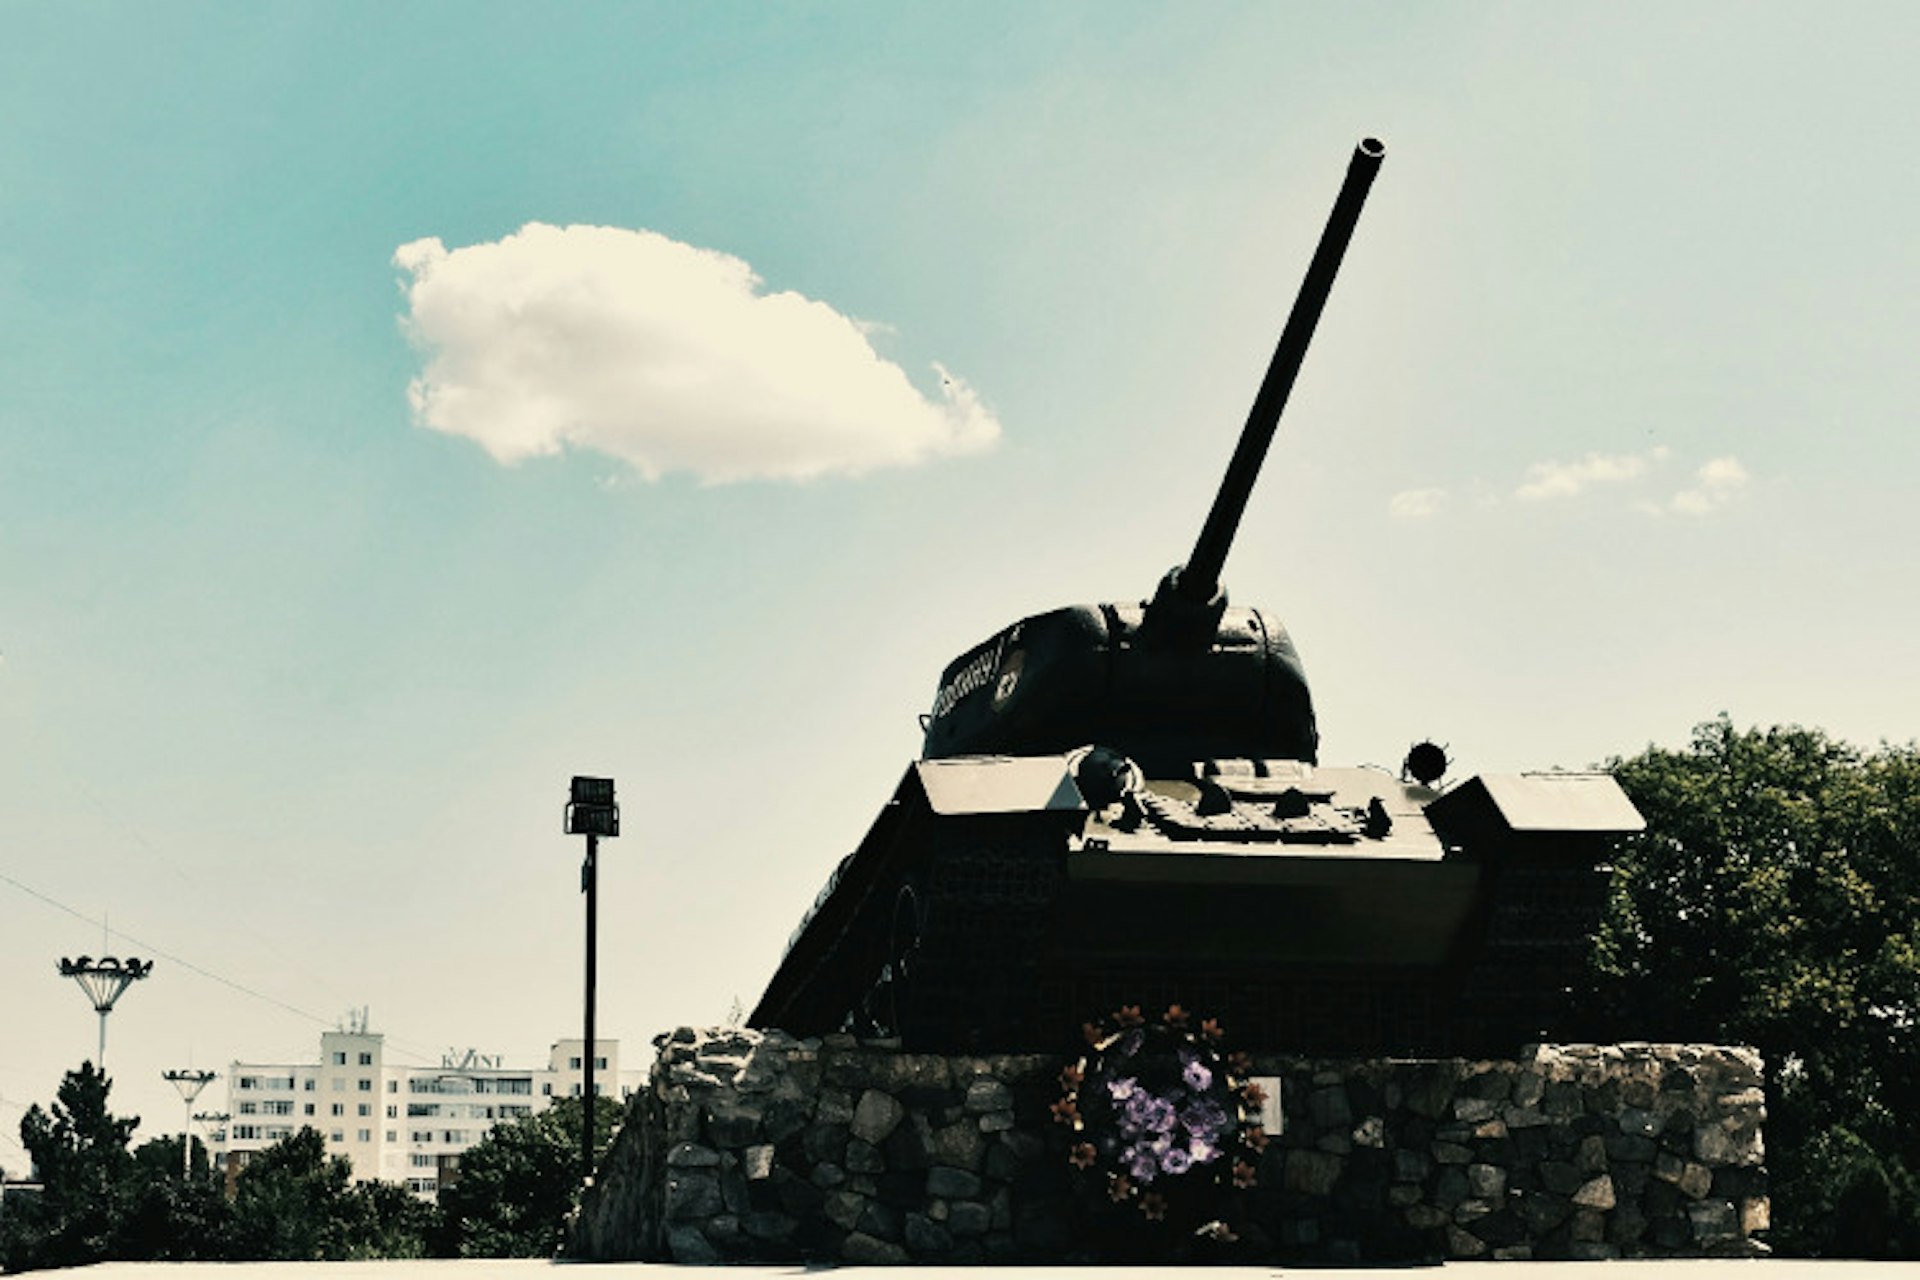 Old Soviet tank across from the Presidential Palace, Tiraspol. Image by Mark Baker / Lonely Planet